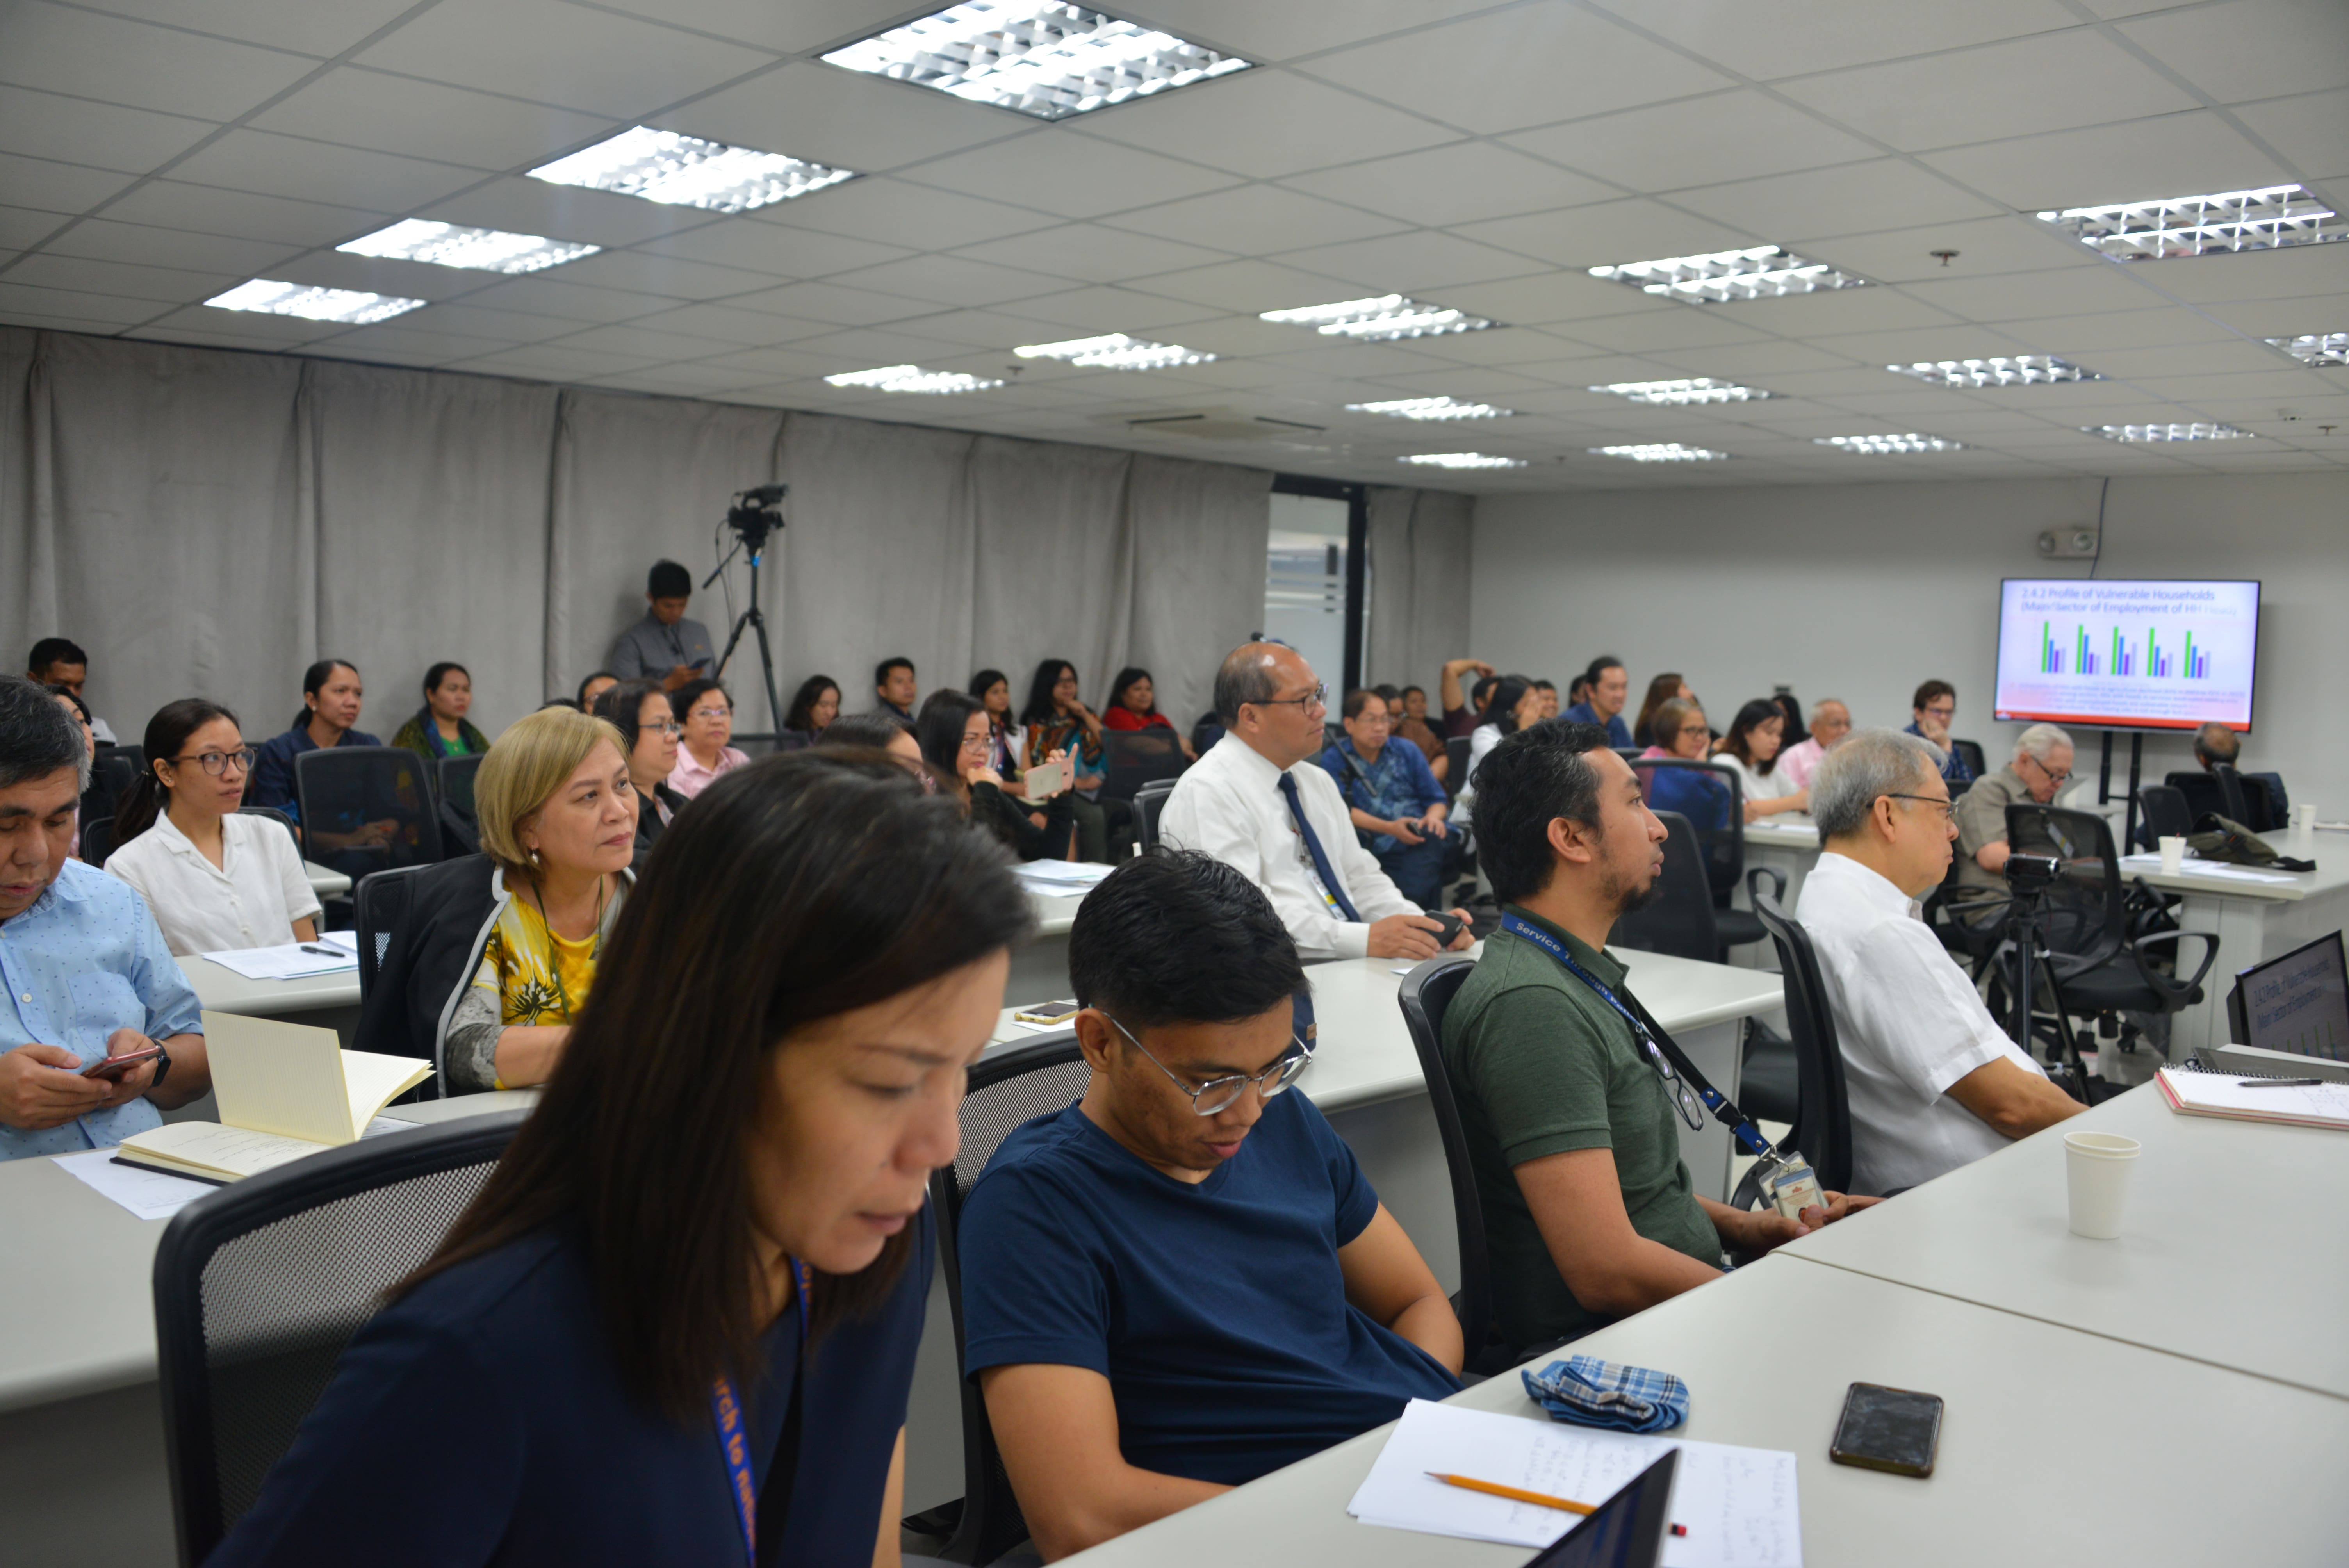 Public Seminar on Poverty and Child Stunting-pids-poverty-9-20190725.jpg